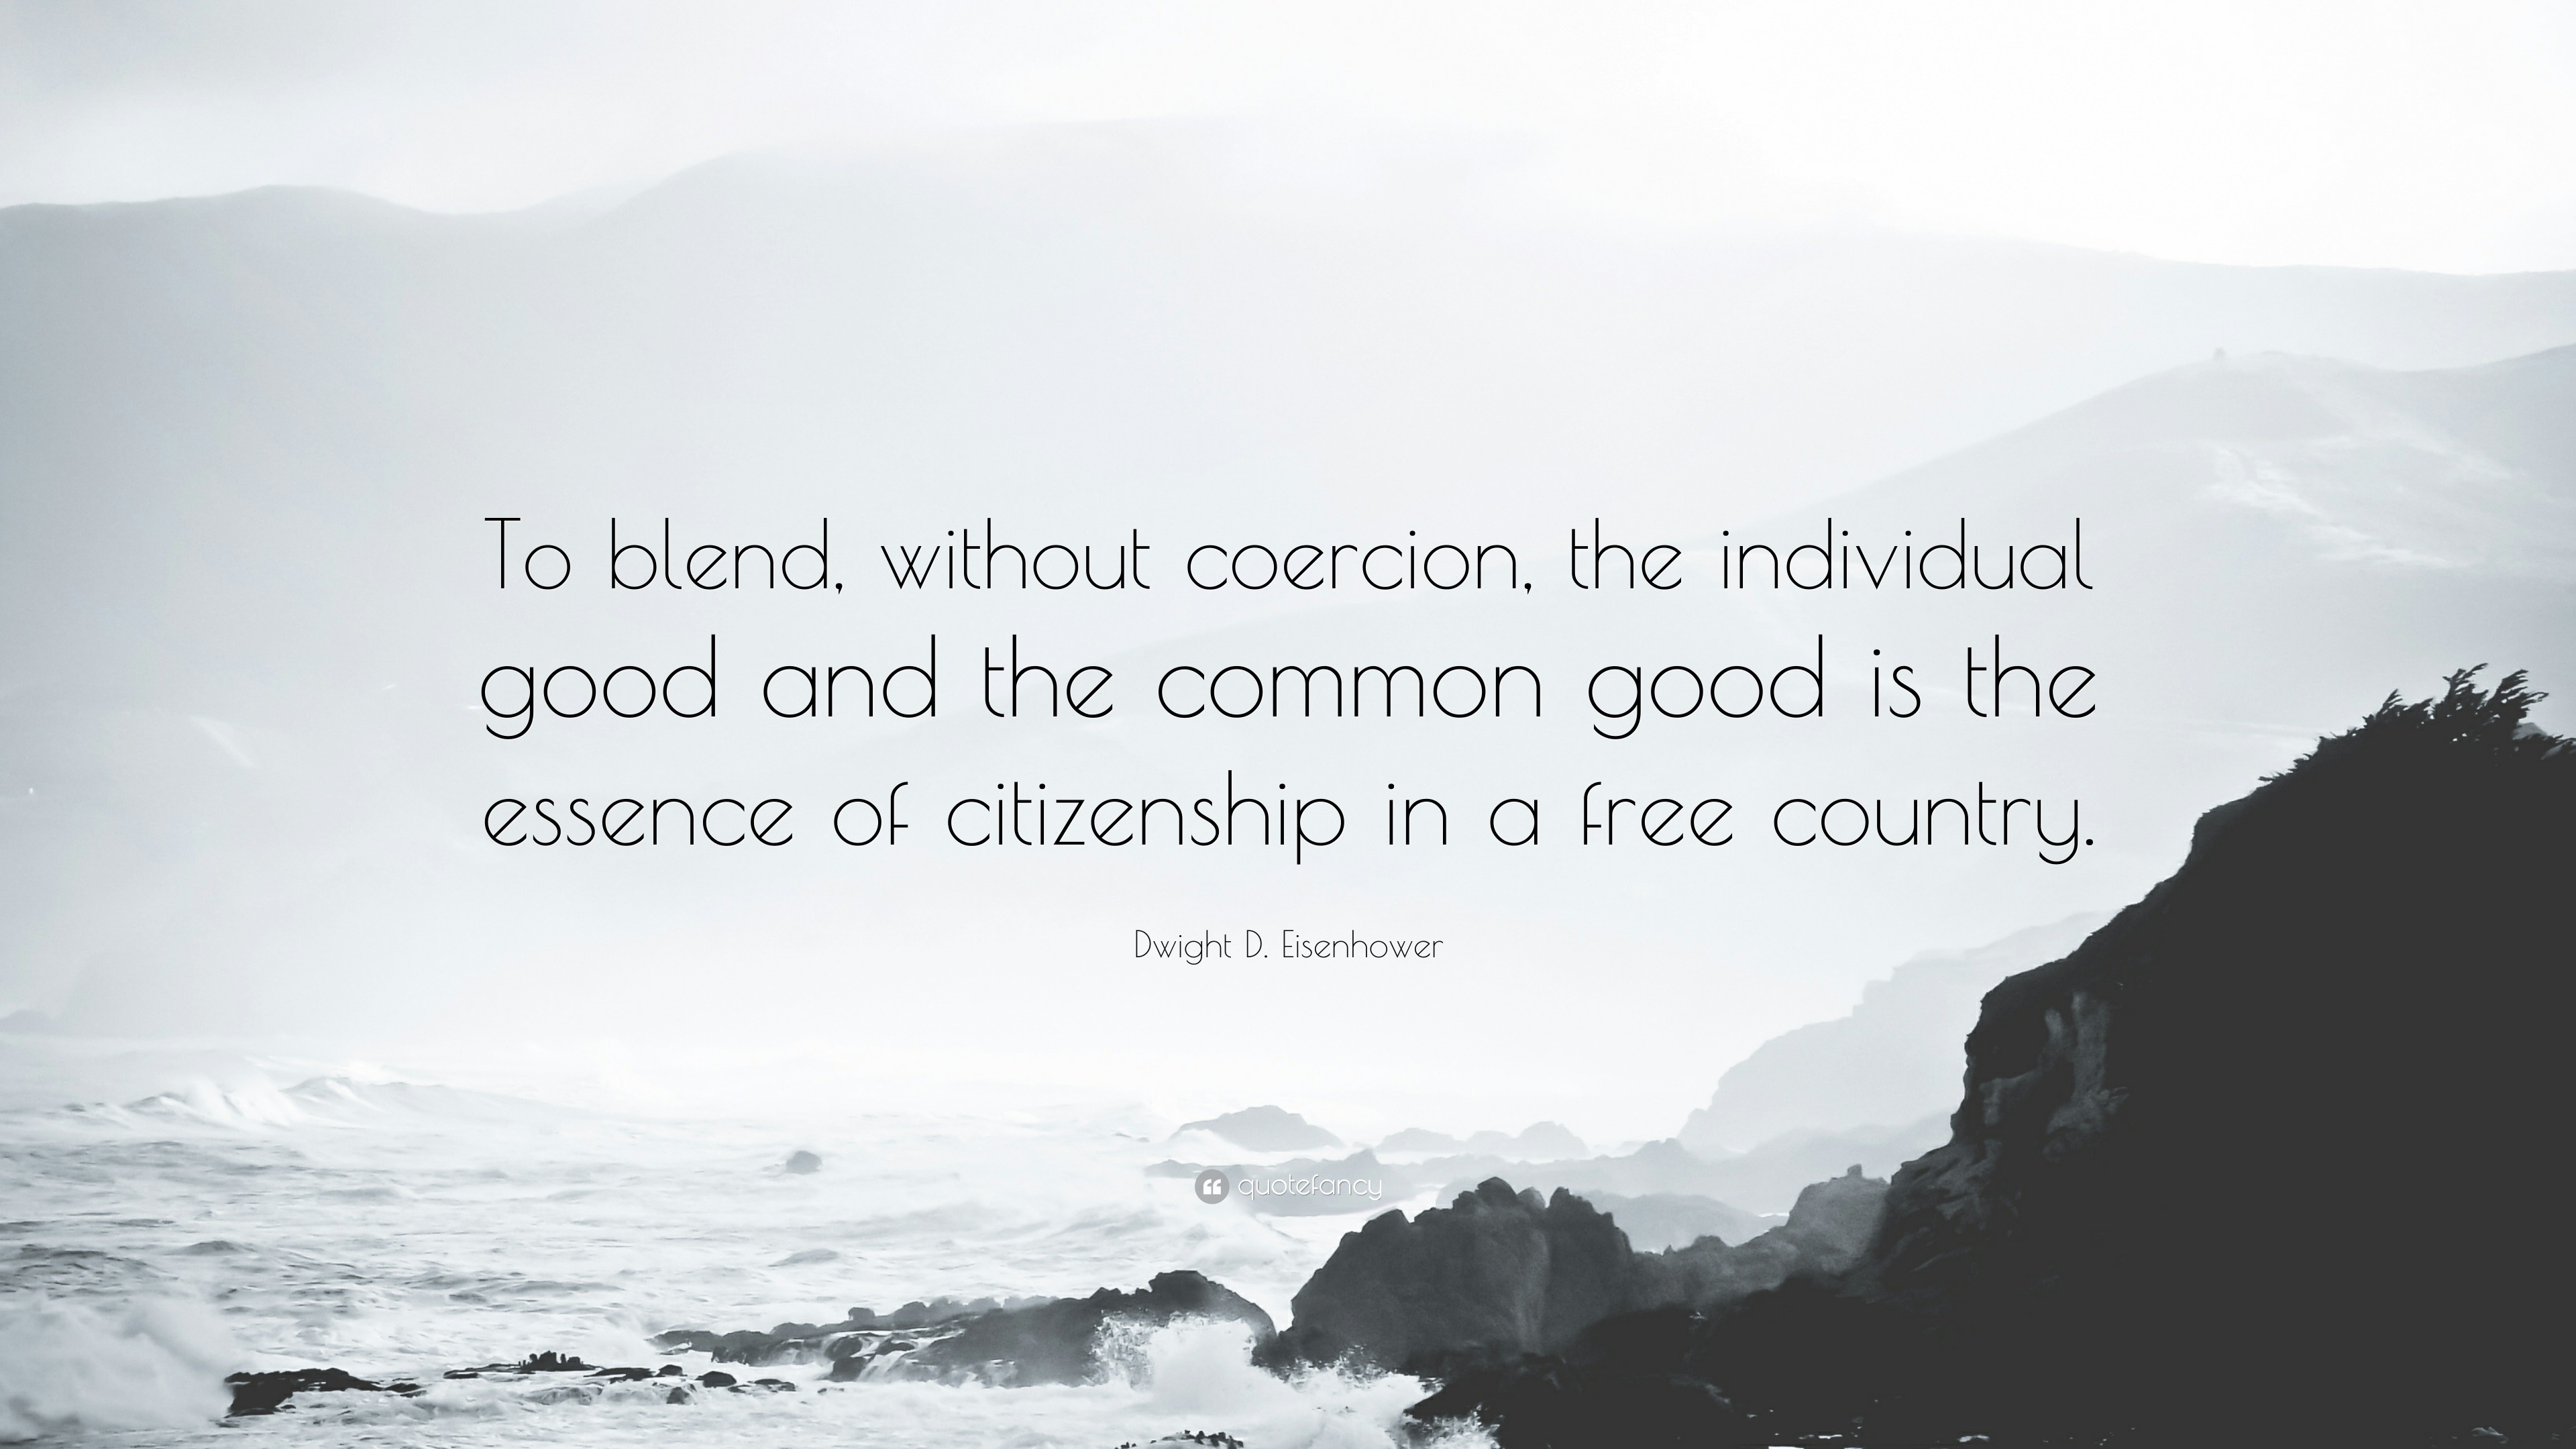 Dwight D. Eisenhower Quote: “To blend, without coercion, the individual  good and the common good is